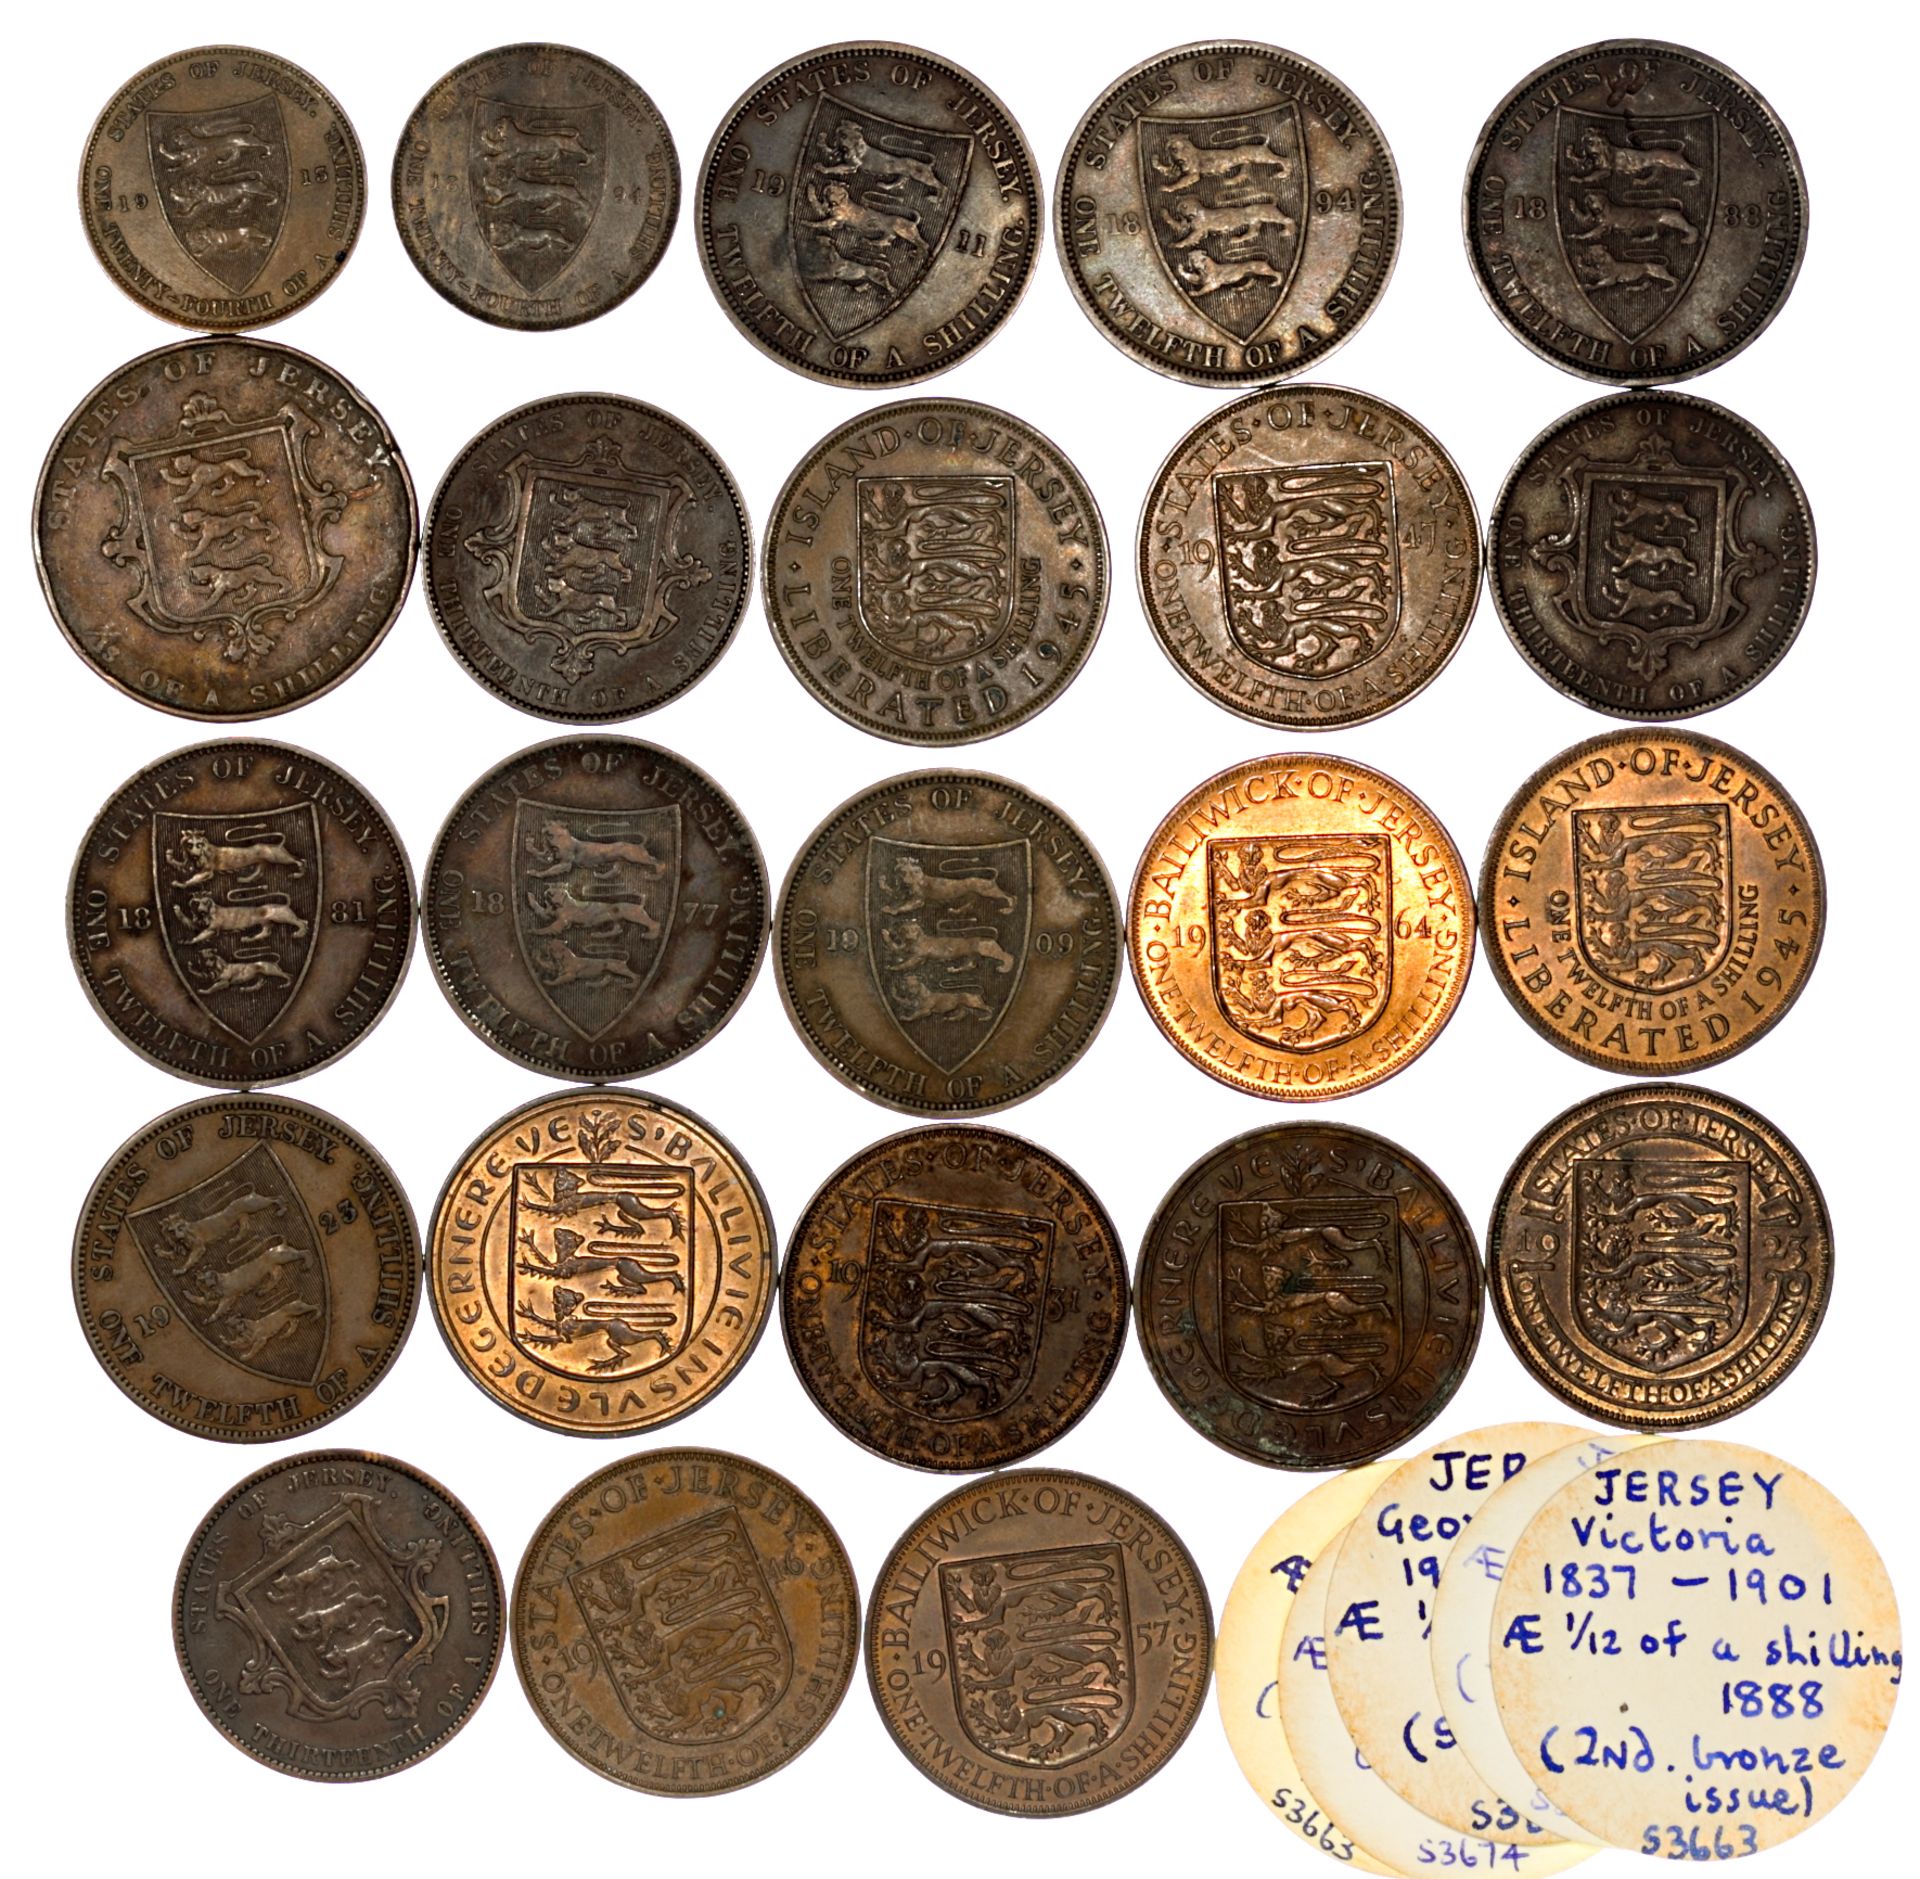 Channel Islands - Collection of coins from Jersey & Guernsey (saleroom location: S3 GC4) - Image 2 of 2